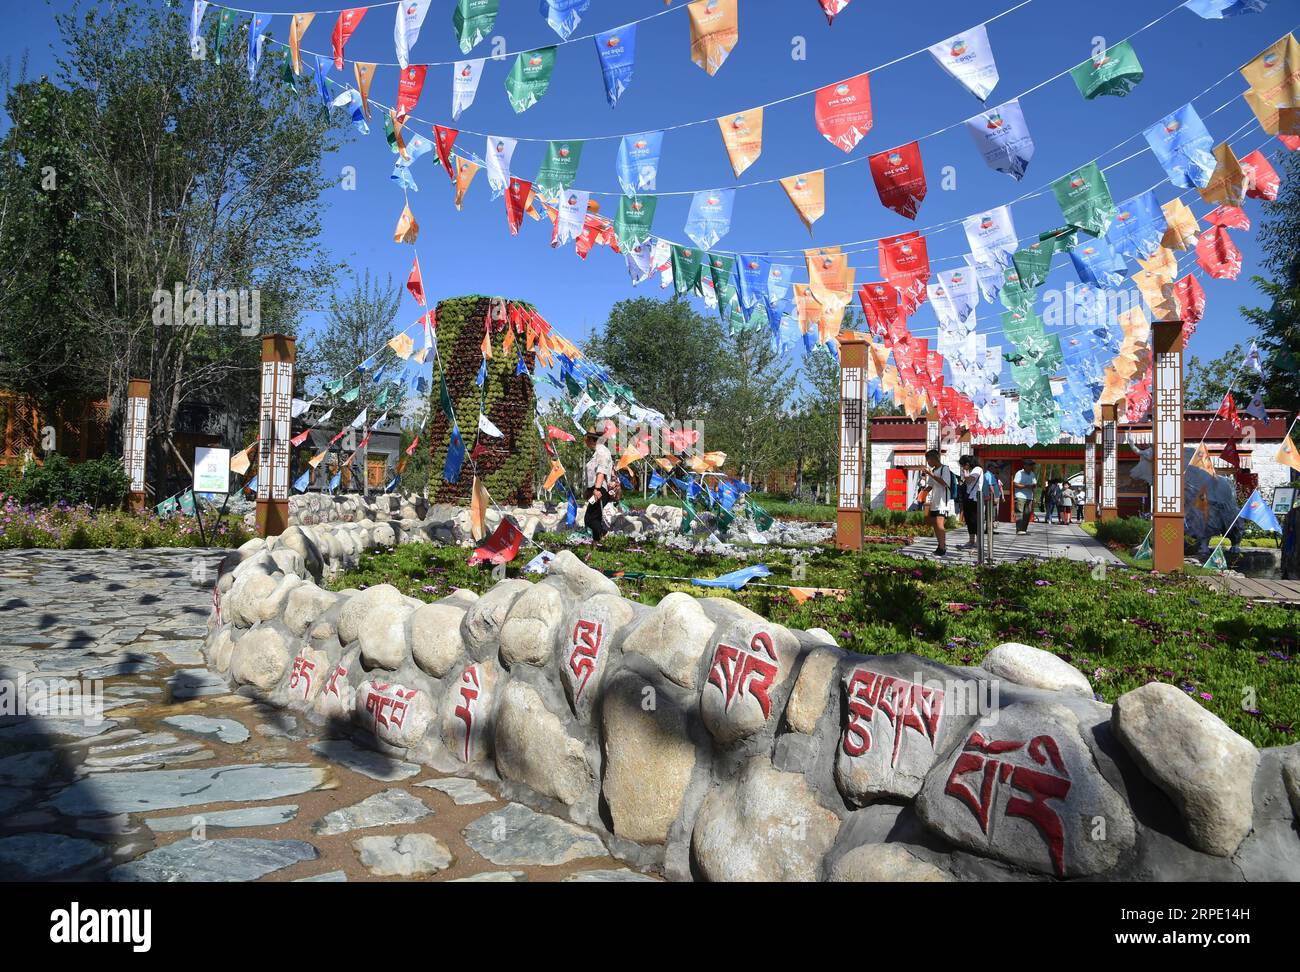 (190816) -- BEIJING, Aug. 16, 2019 -- Tourists visit the Tibet Garden at the Beijing International Horticultural Exhibition in Beijing, capital of China, Aug. 15, 2019. Tibet has seen significant progress in restoring biodiversity, with a forest coverage rate of 12.14 percent, said a white paper released in March this year by China s State Council Information Office. The population of Tibetan antelopes has grown from 60,000 in the 1990s to more than 200,000 and Tibetan wild donkeys have increased in numbers from 50,000 to 80,000, noted the document, titled Democratic Reform in Tibet -- Sixty Y Stock Photo